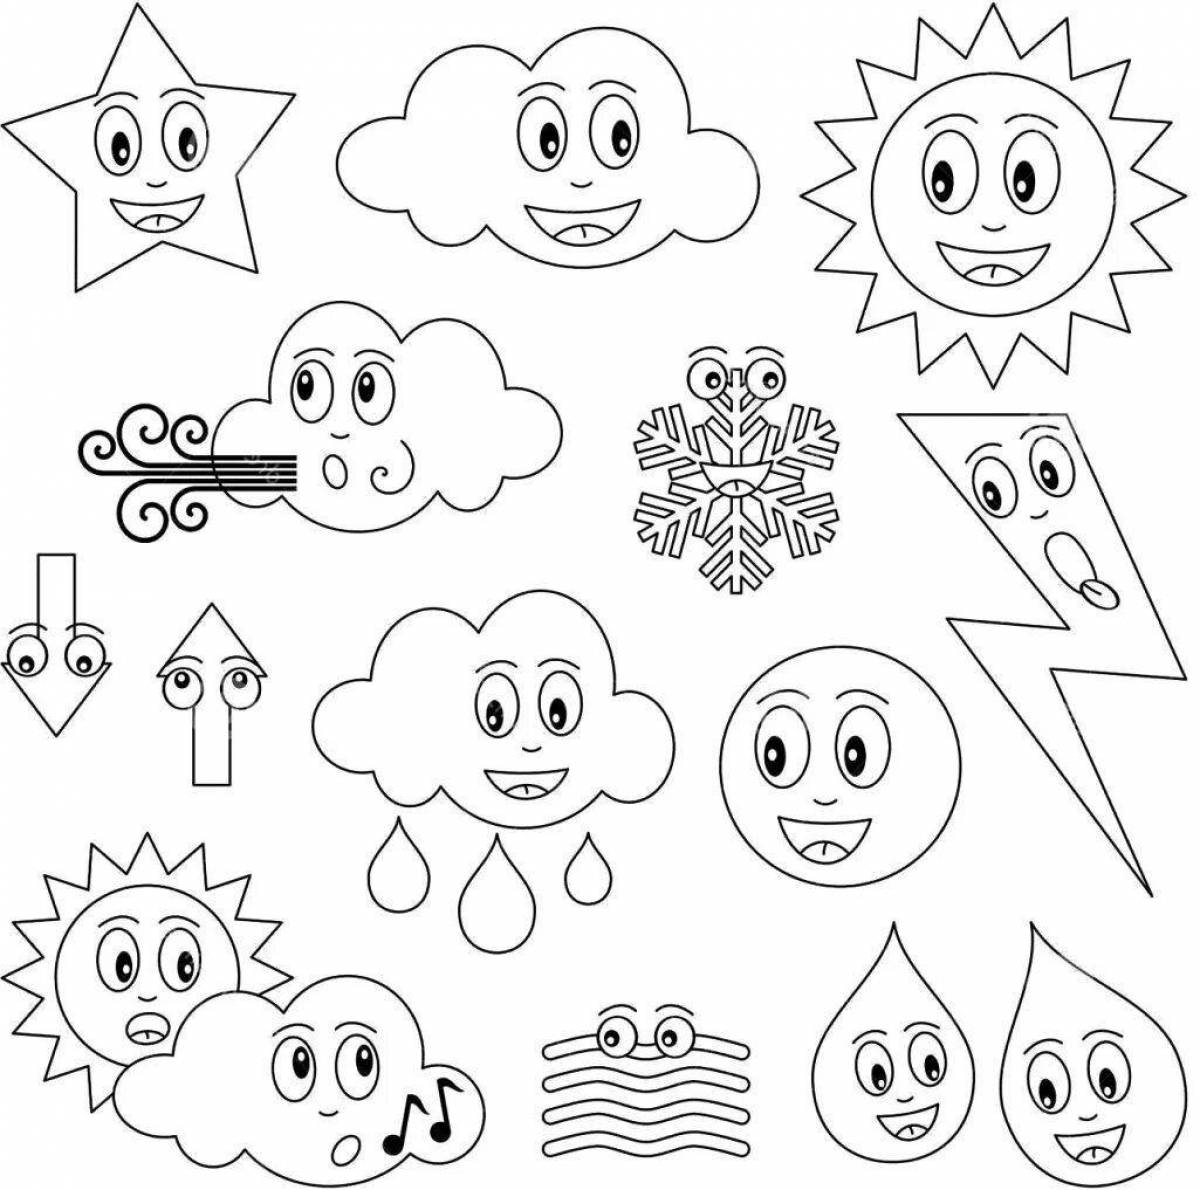 Sunny weather coloring page for kids